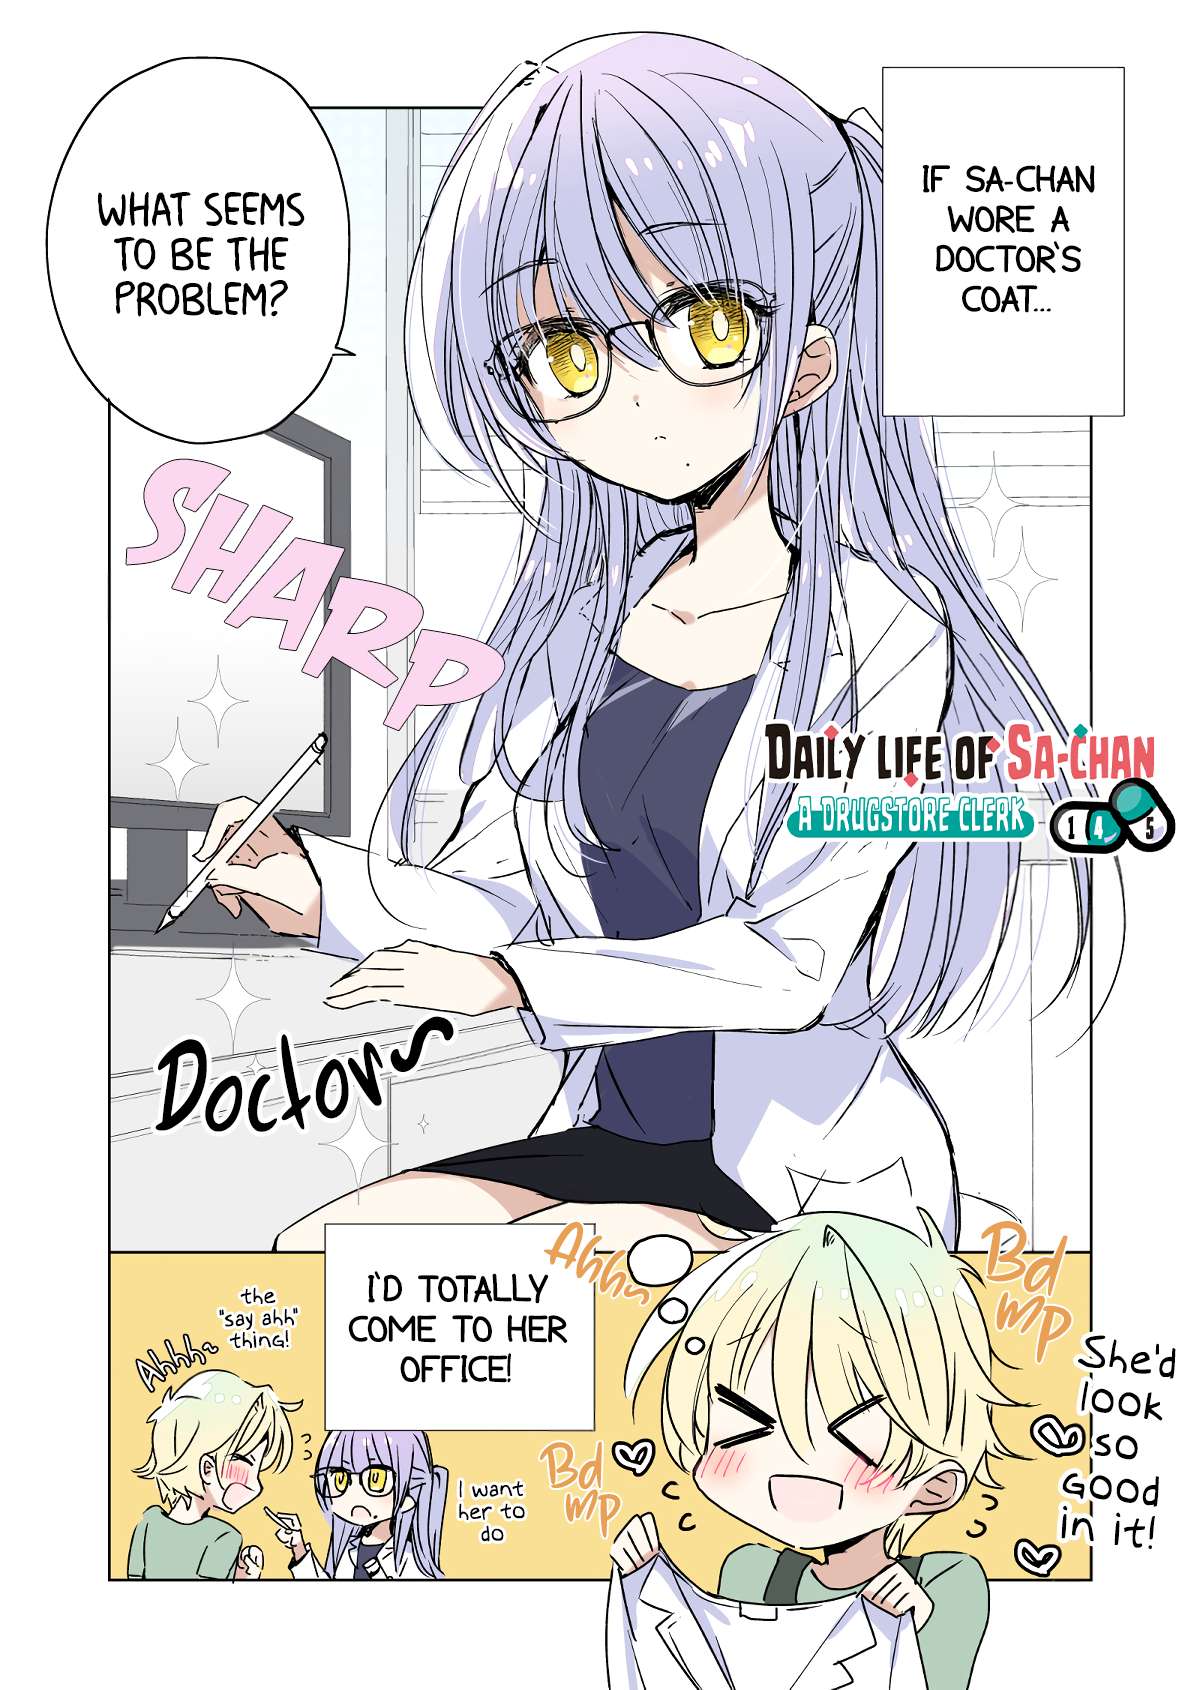 Daily Life Of Sa-Chan, A Drugstore Clerk - chapter 14.5 - #1